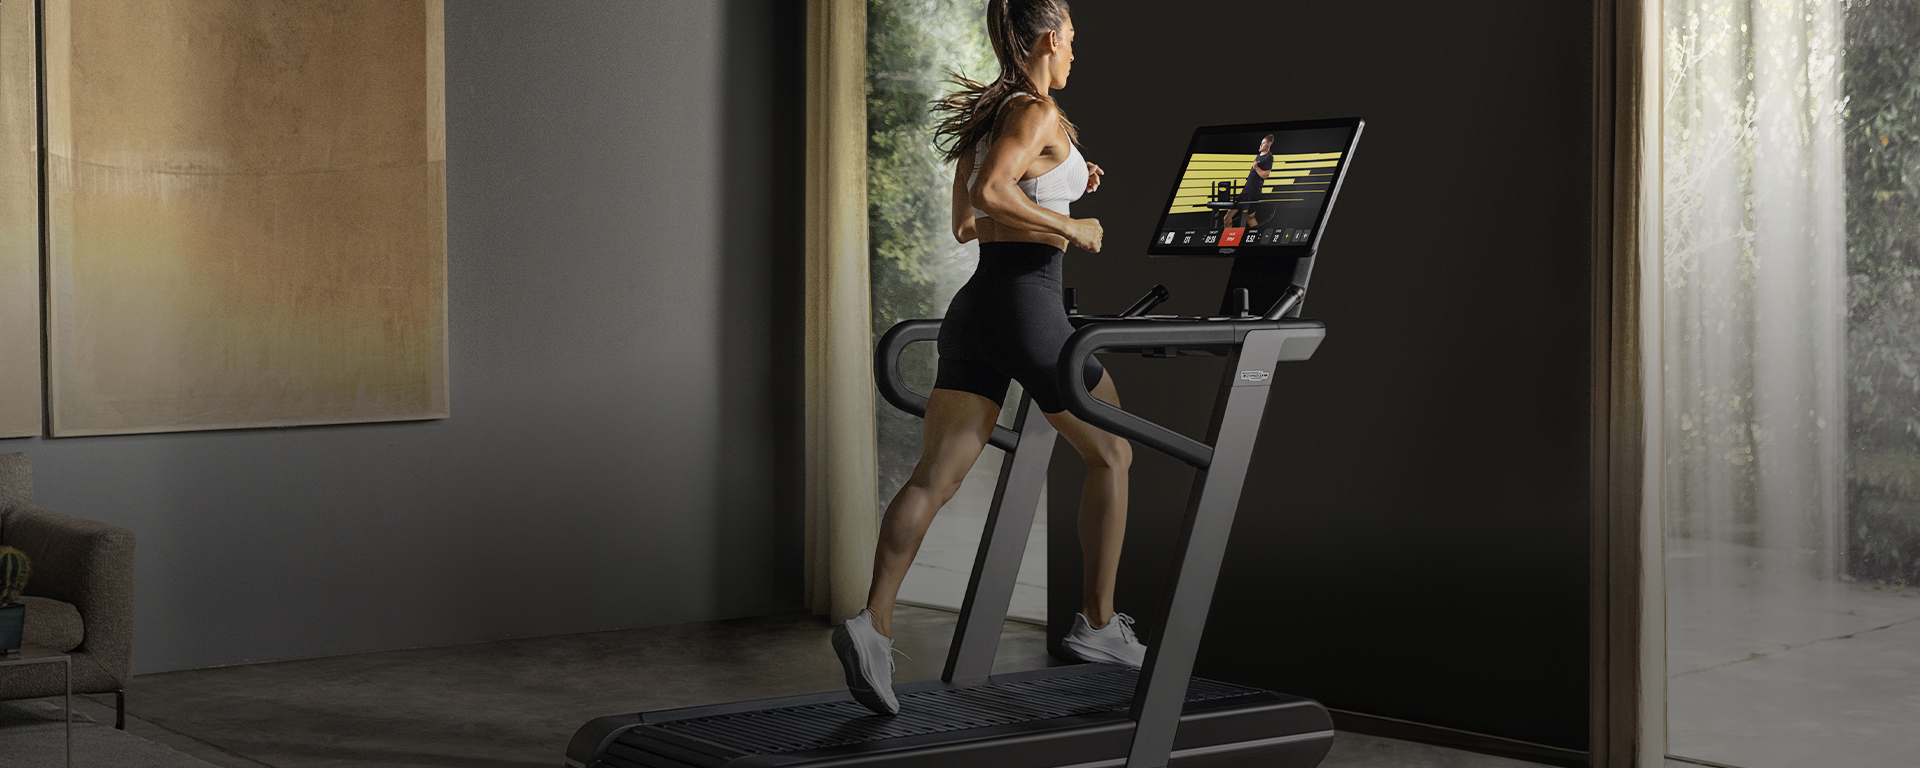 
How To Not Get Bored On The Treadmill: 4 Creative Tips and Tricks